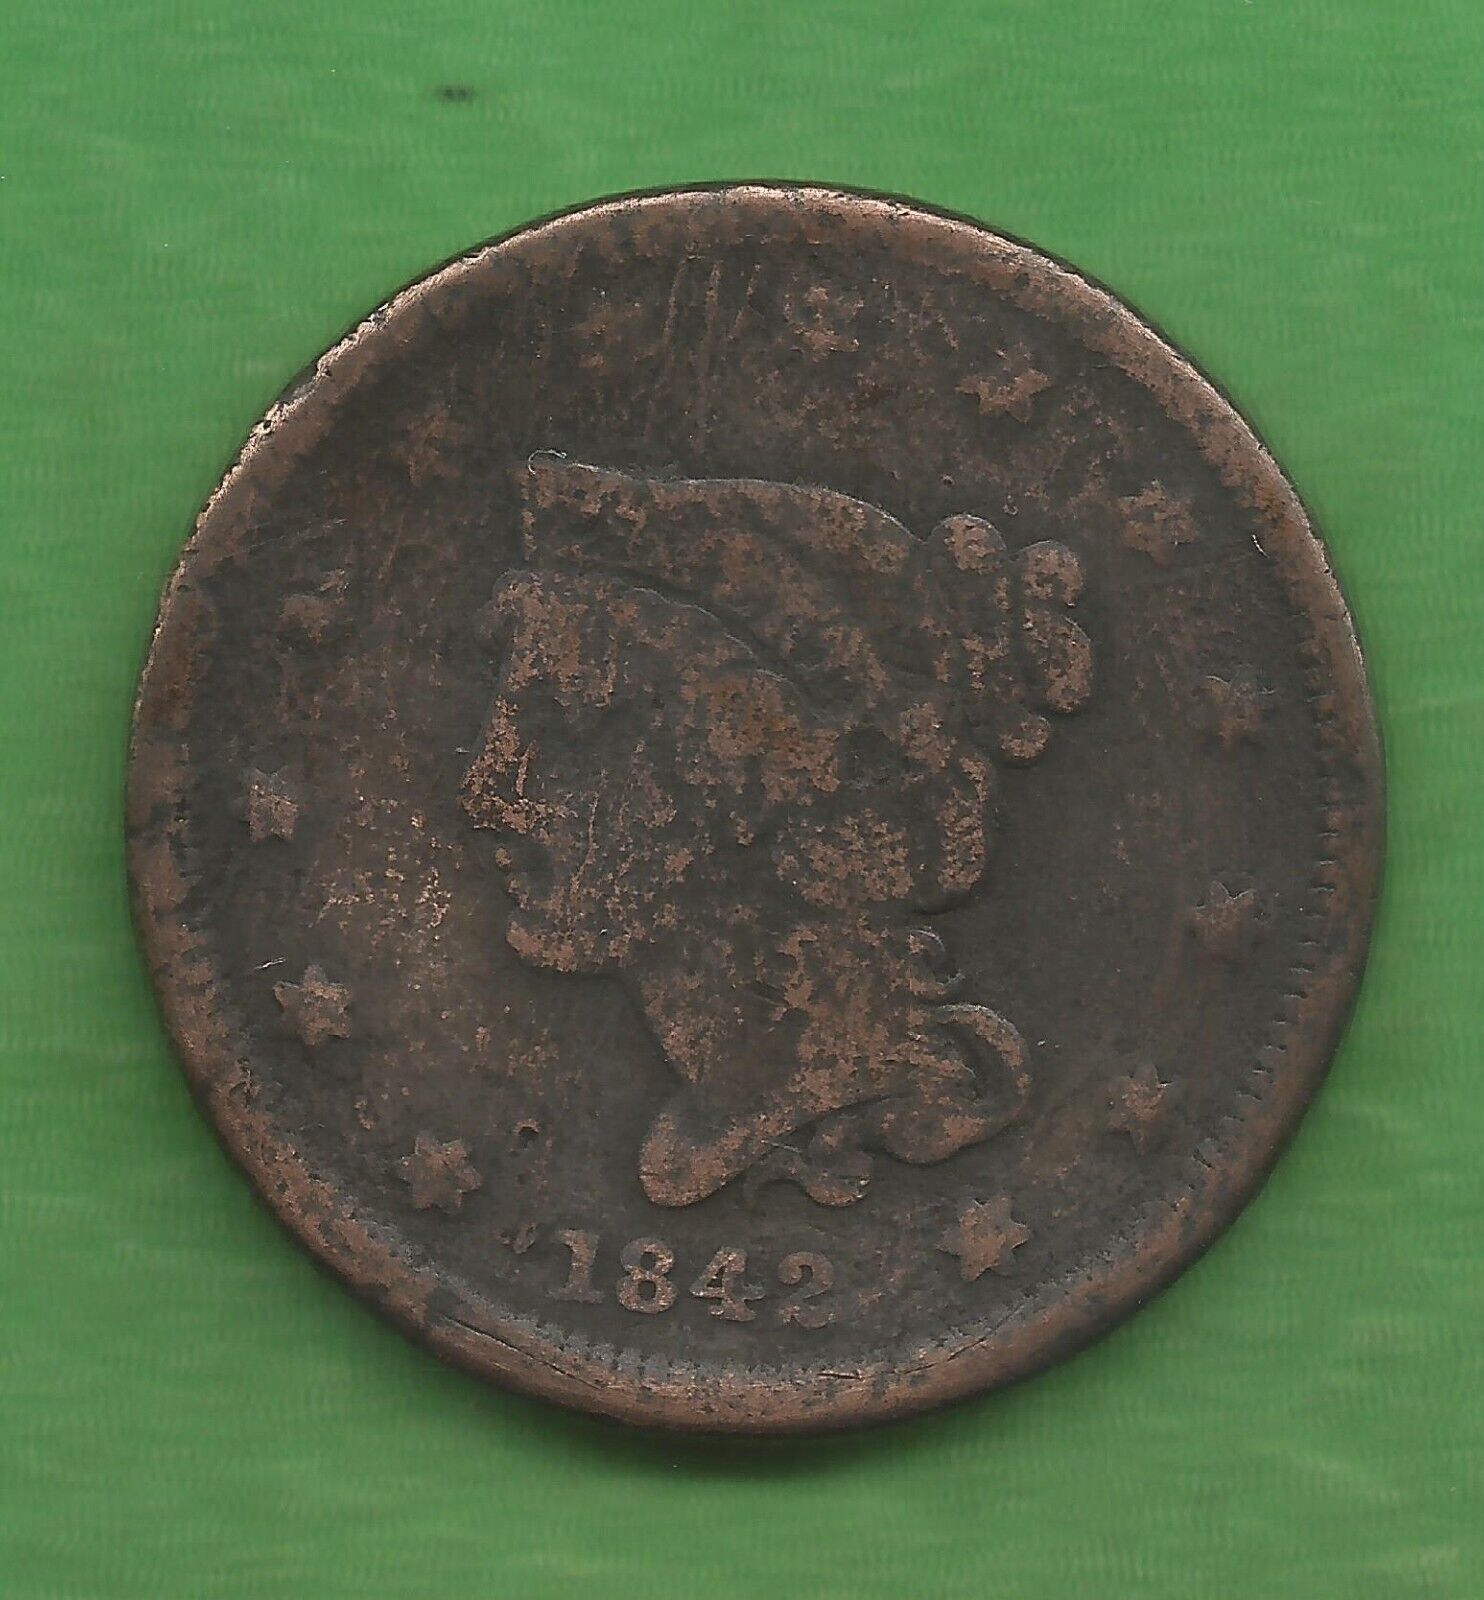 1842 Braided Hair Large Cent, Small Date - 180 Years Old!!!